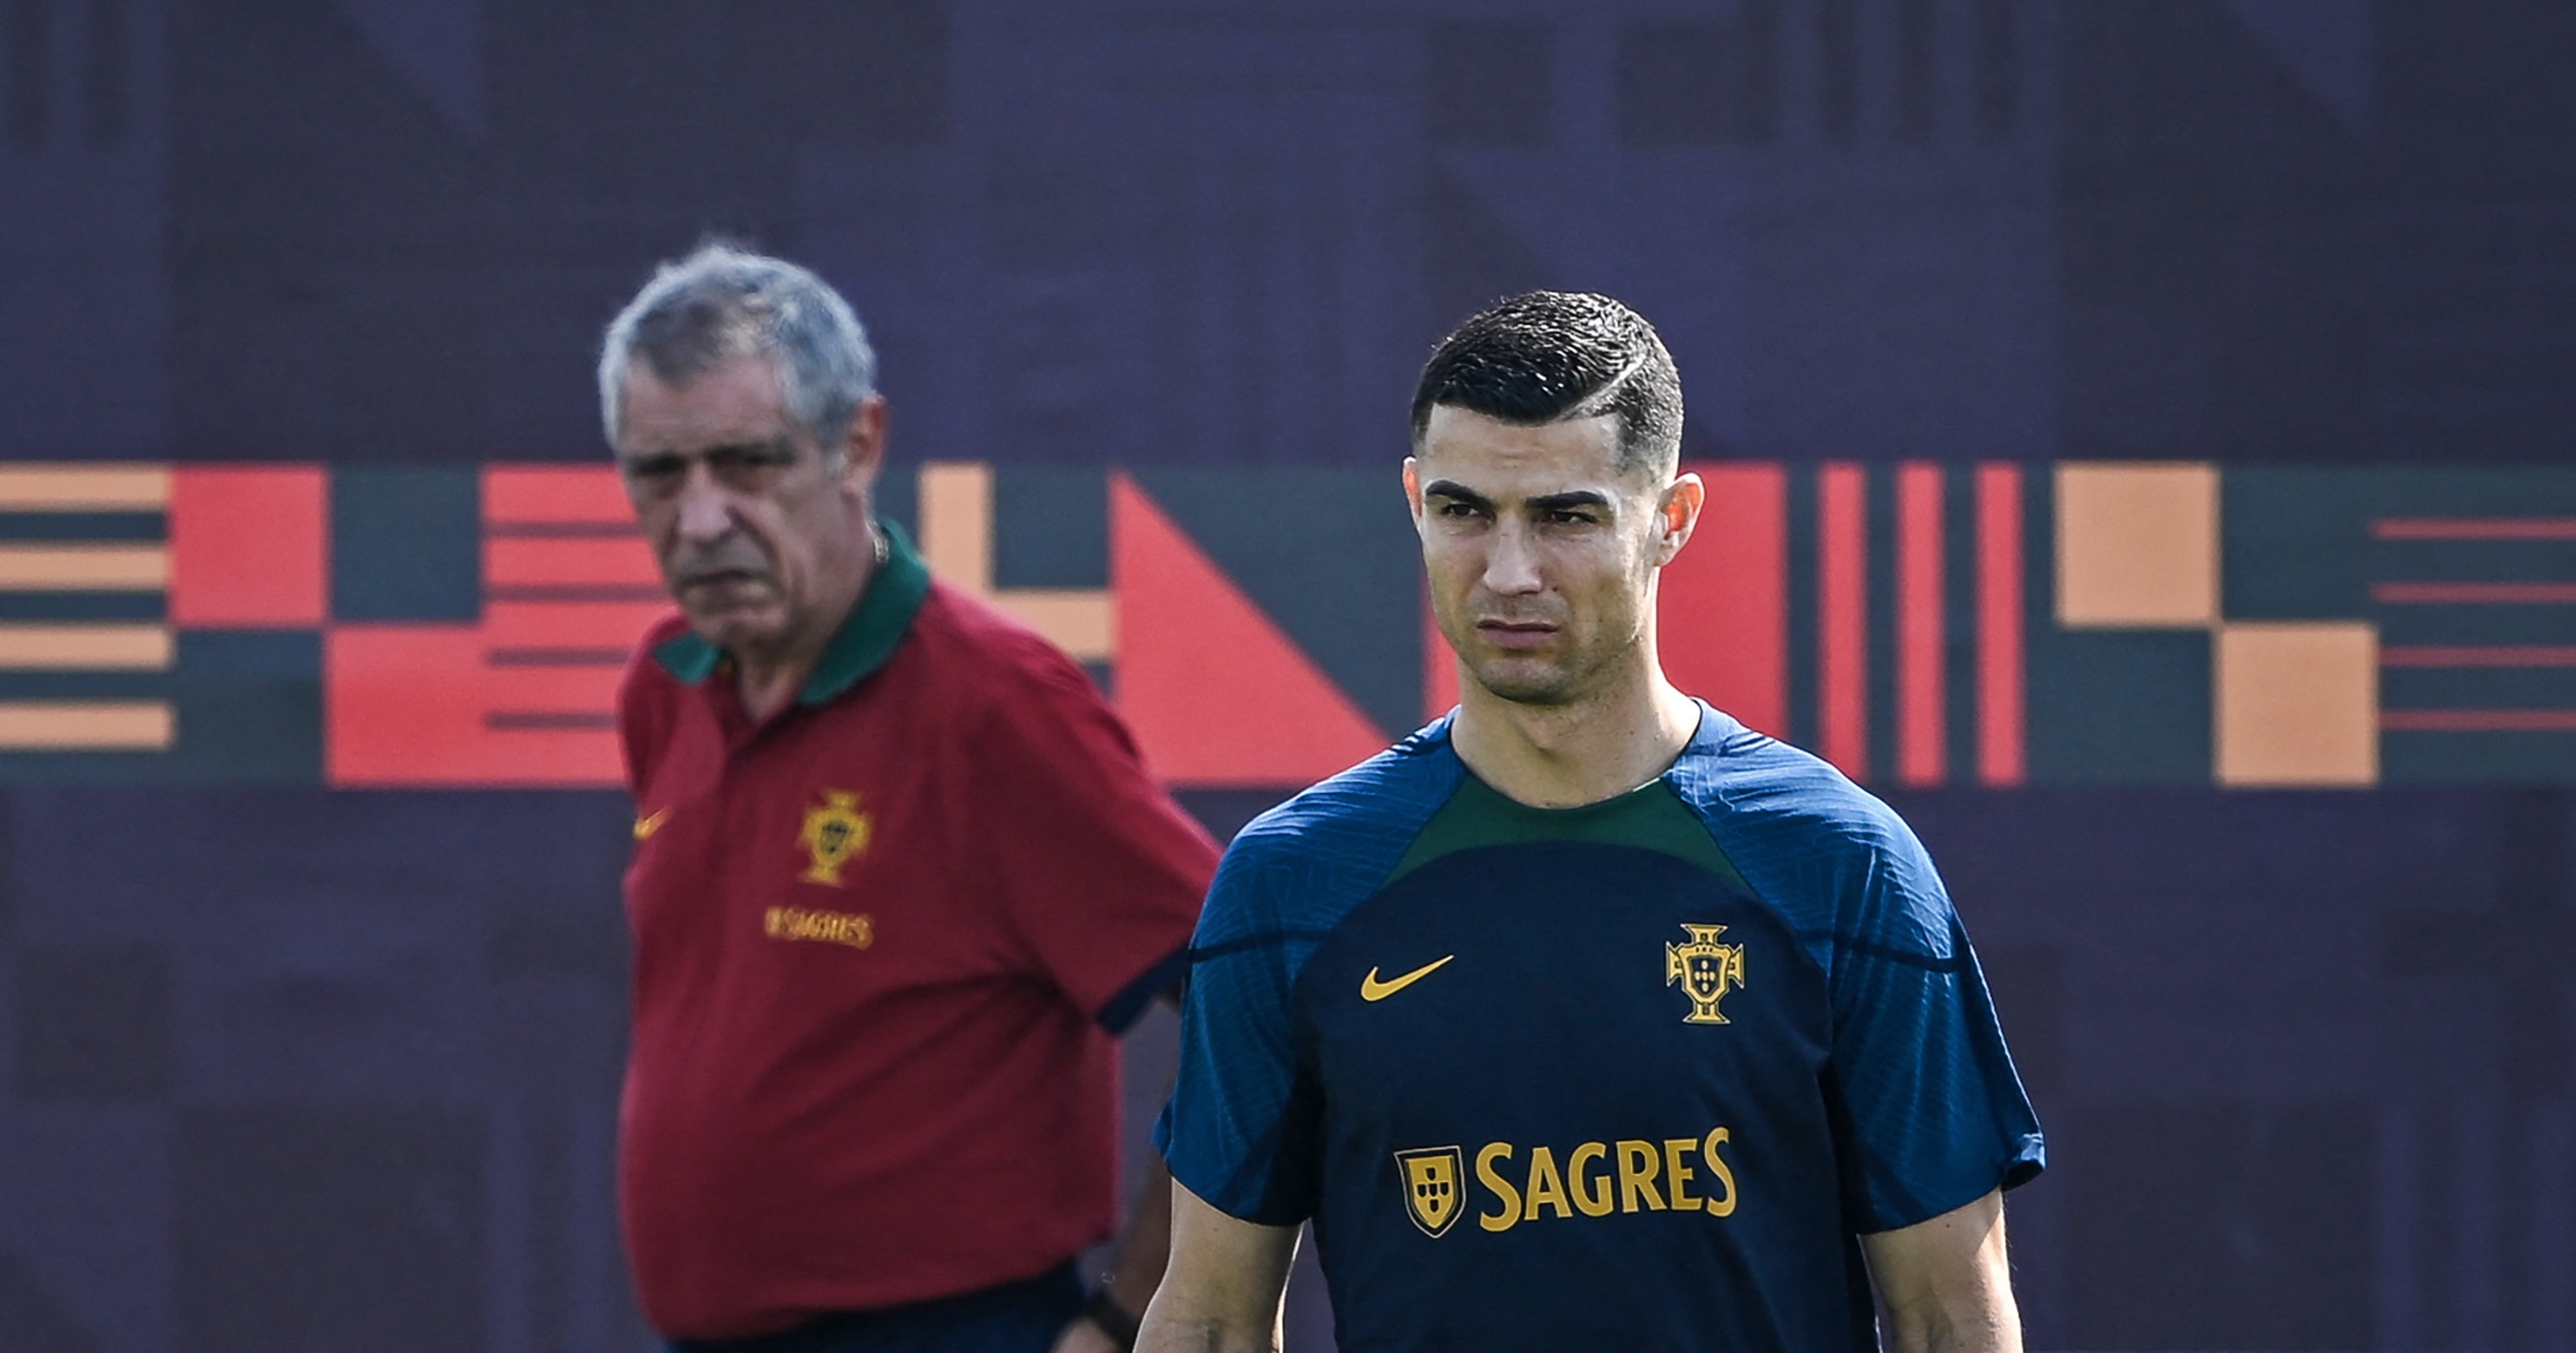 Liverpool fans won’t believe club prepared to take Ronaldo off Man Utd’s hands after interview fiasco